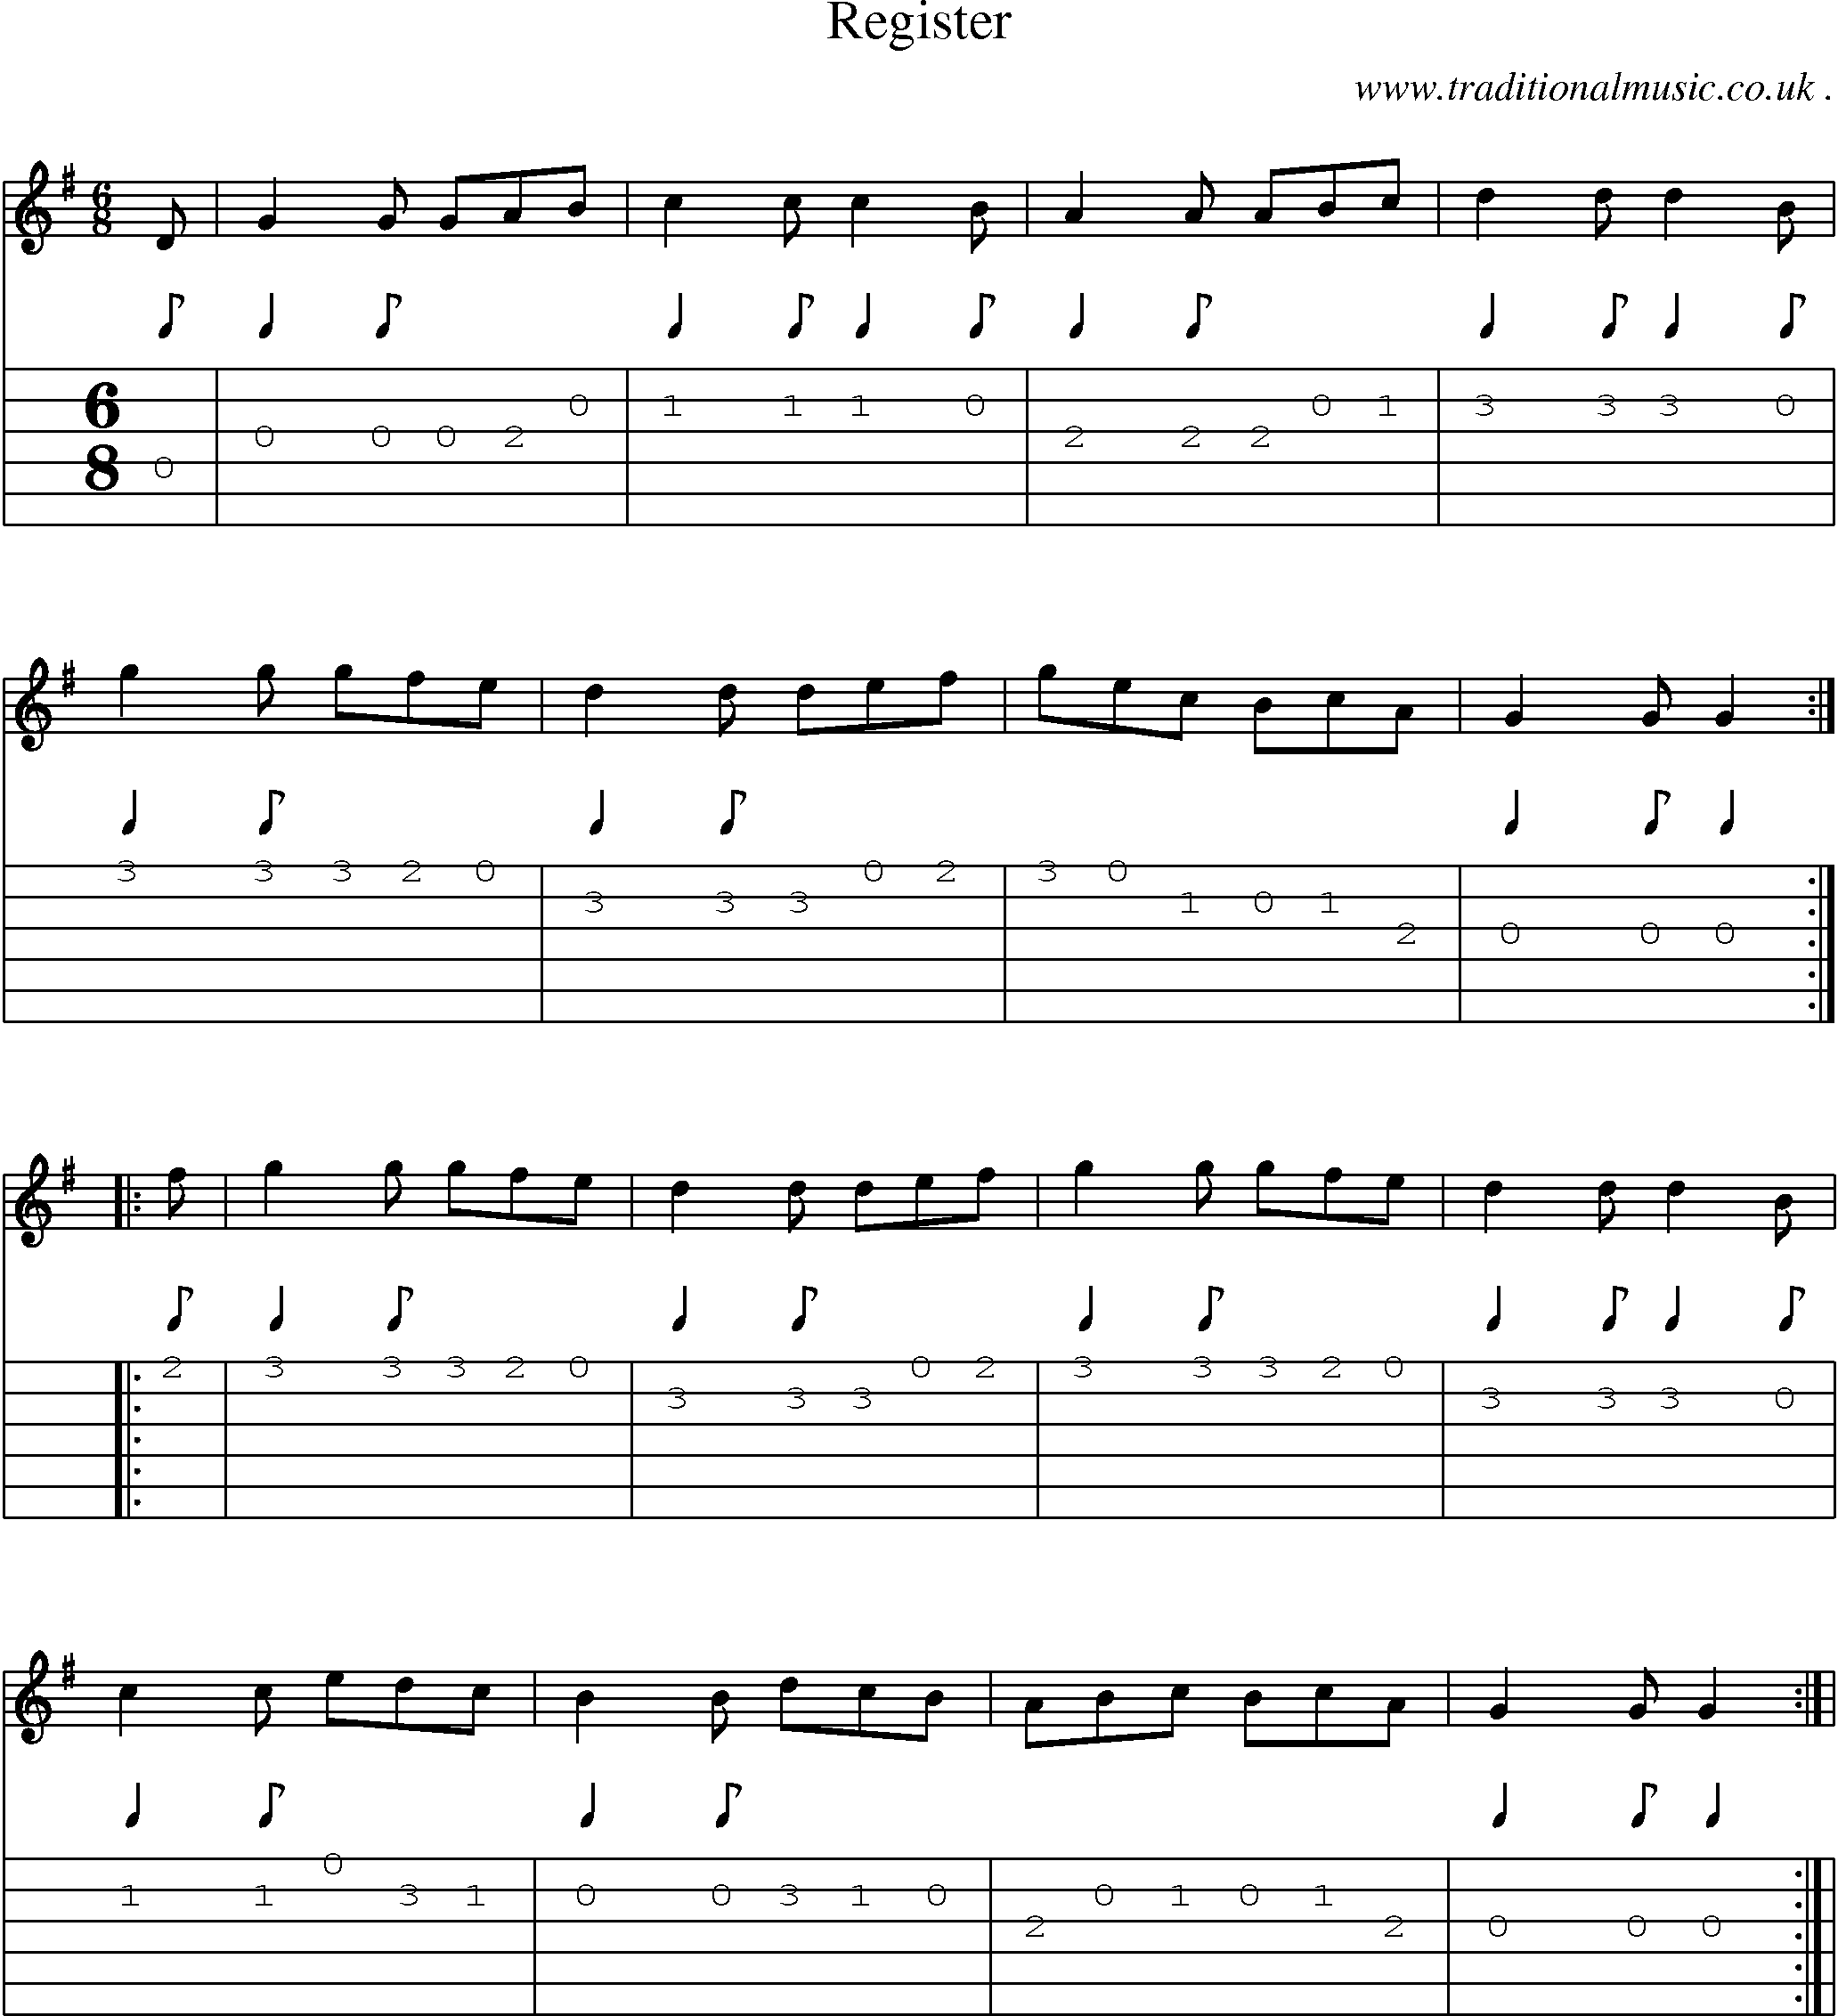 Sheet-Music and Guitar Tabs for Register